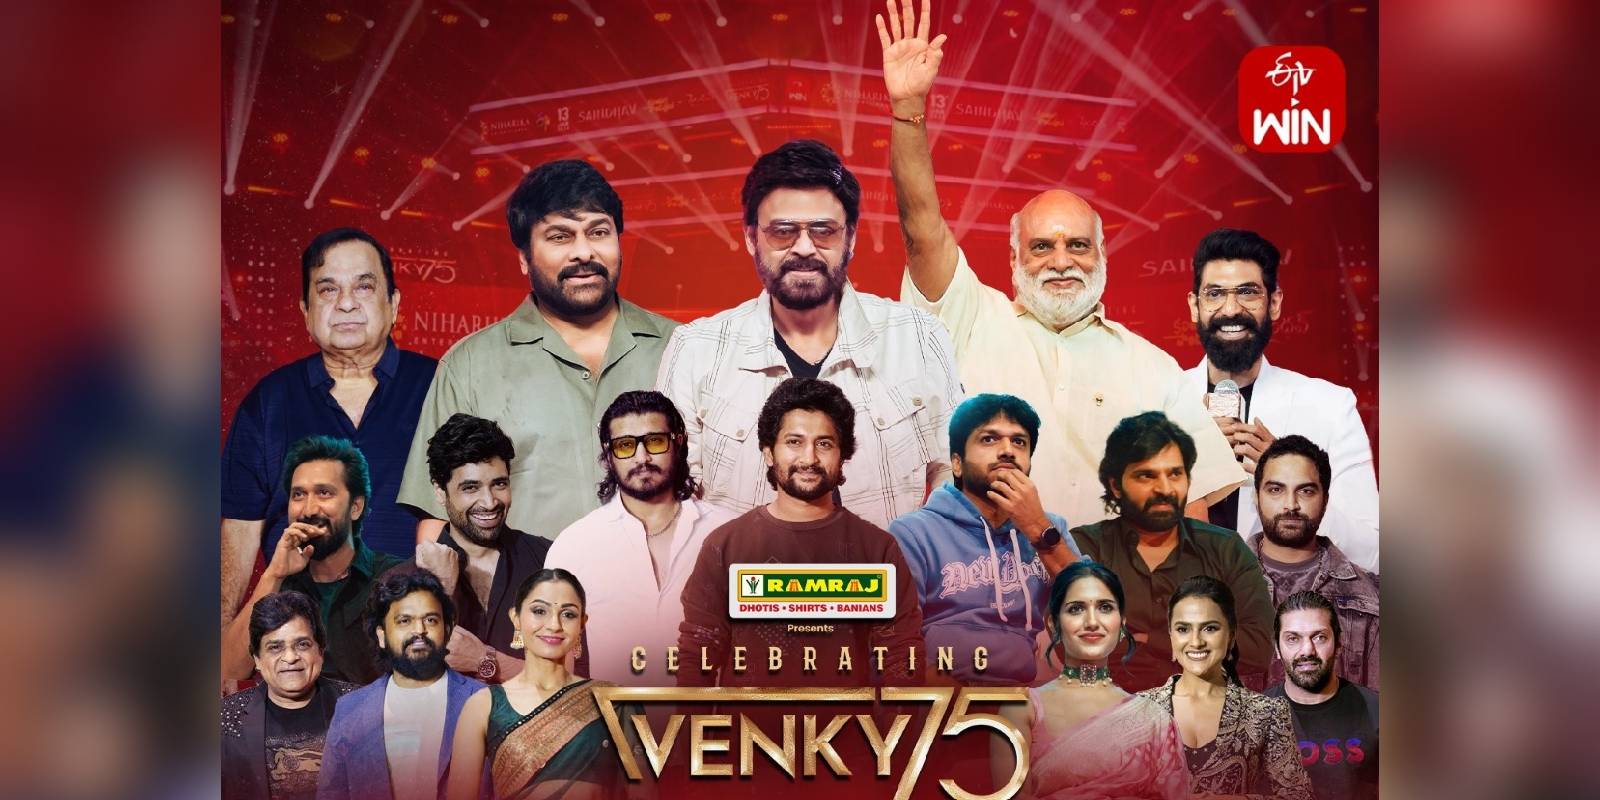 Chiranjeevi’s struggle at ‘Venky75’ event creates doubts among fans